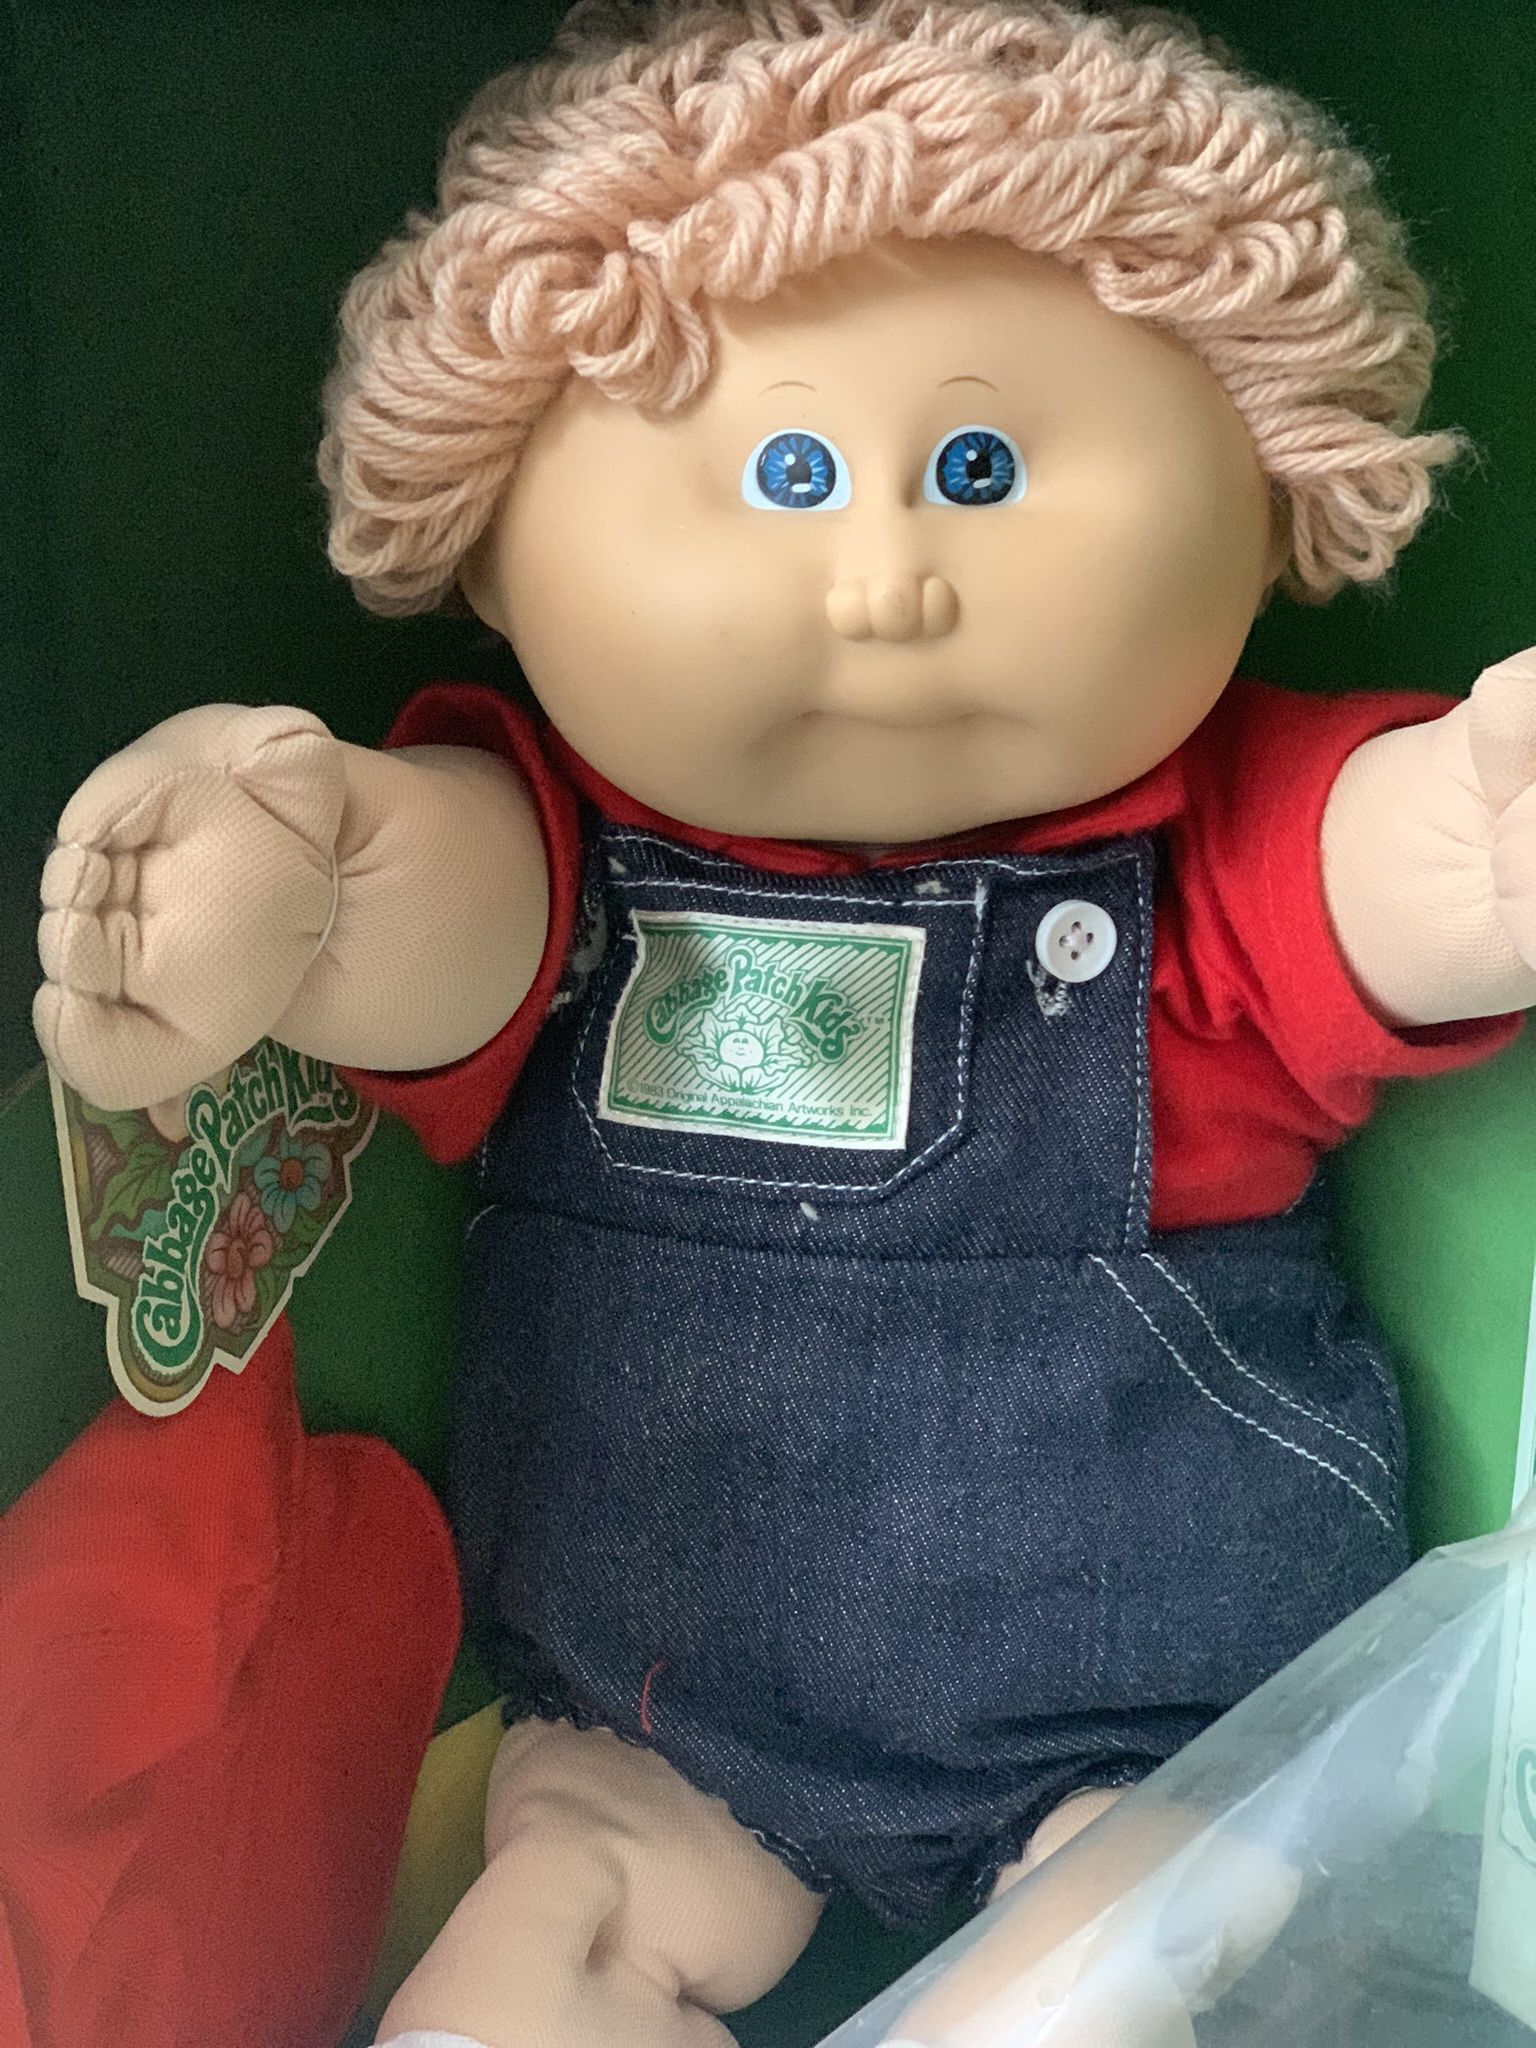 Like New 1985 Cabbage Patch Kids Doll in Original Box | Original Paperwork SEALED | Pickup only